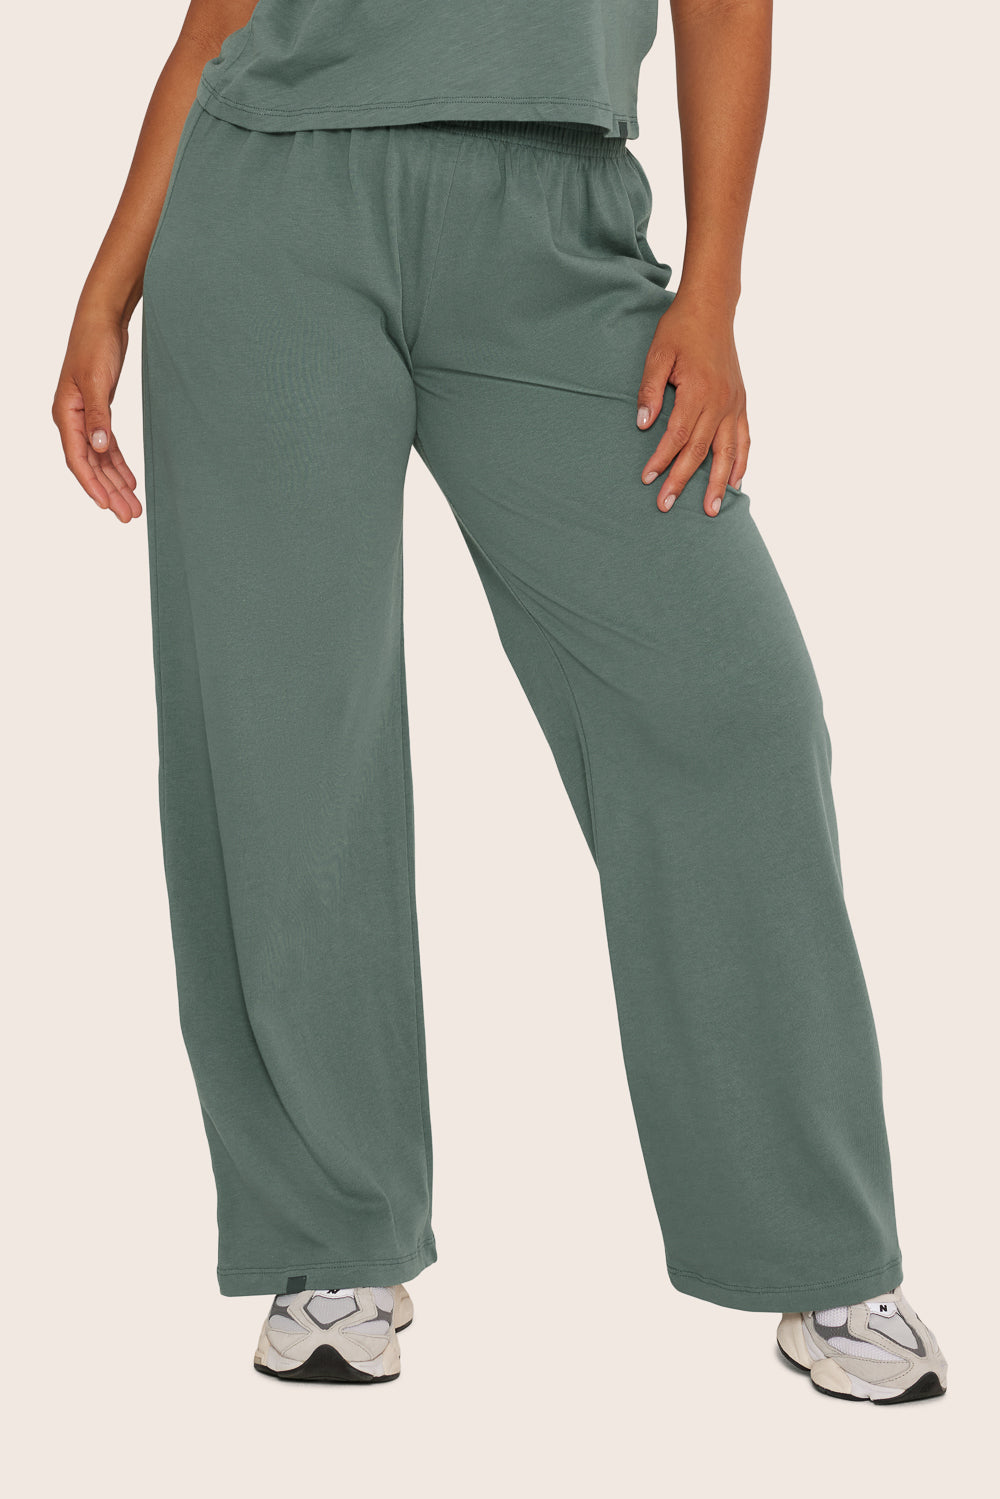 HEAVY COTTON EASY PANTS - WAVE Featured Image